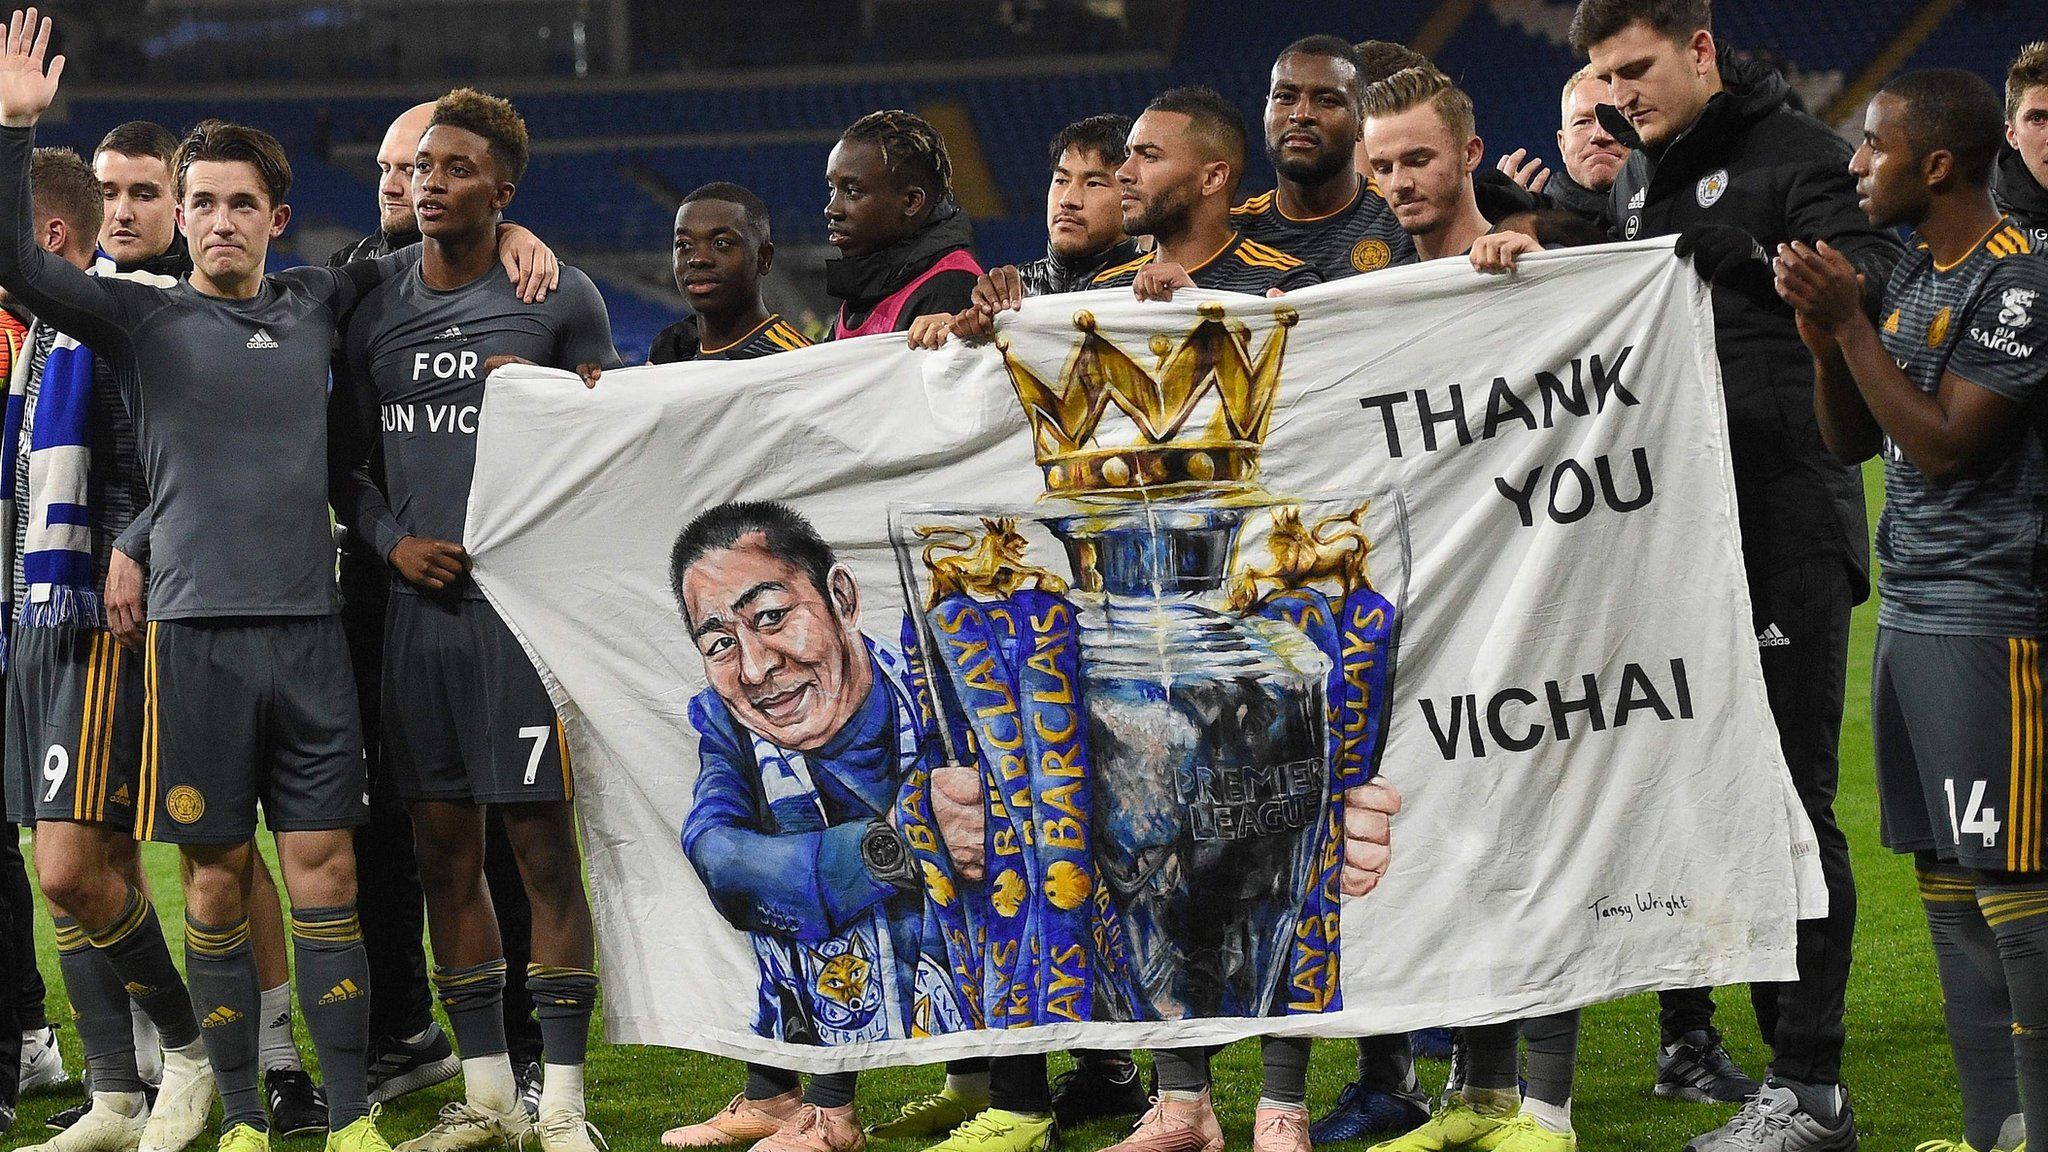 Leicester City players with banner